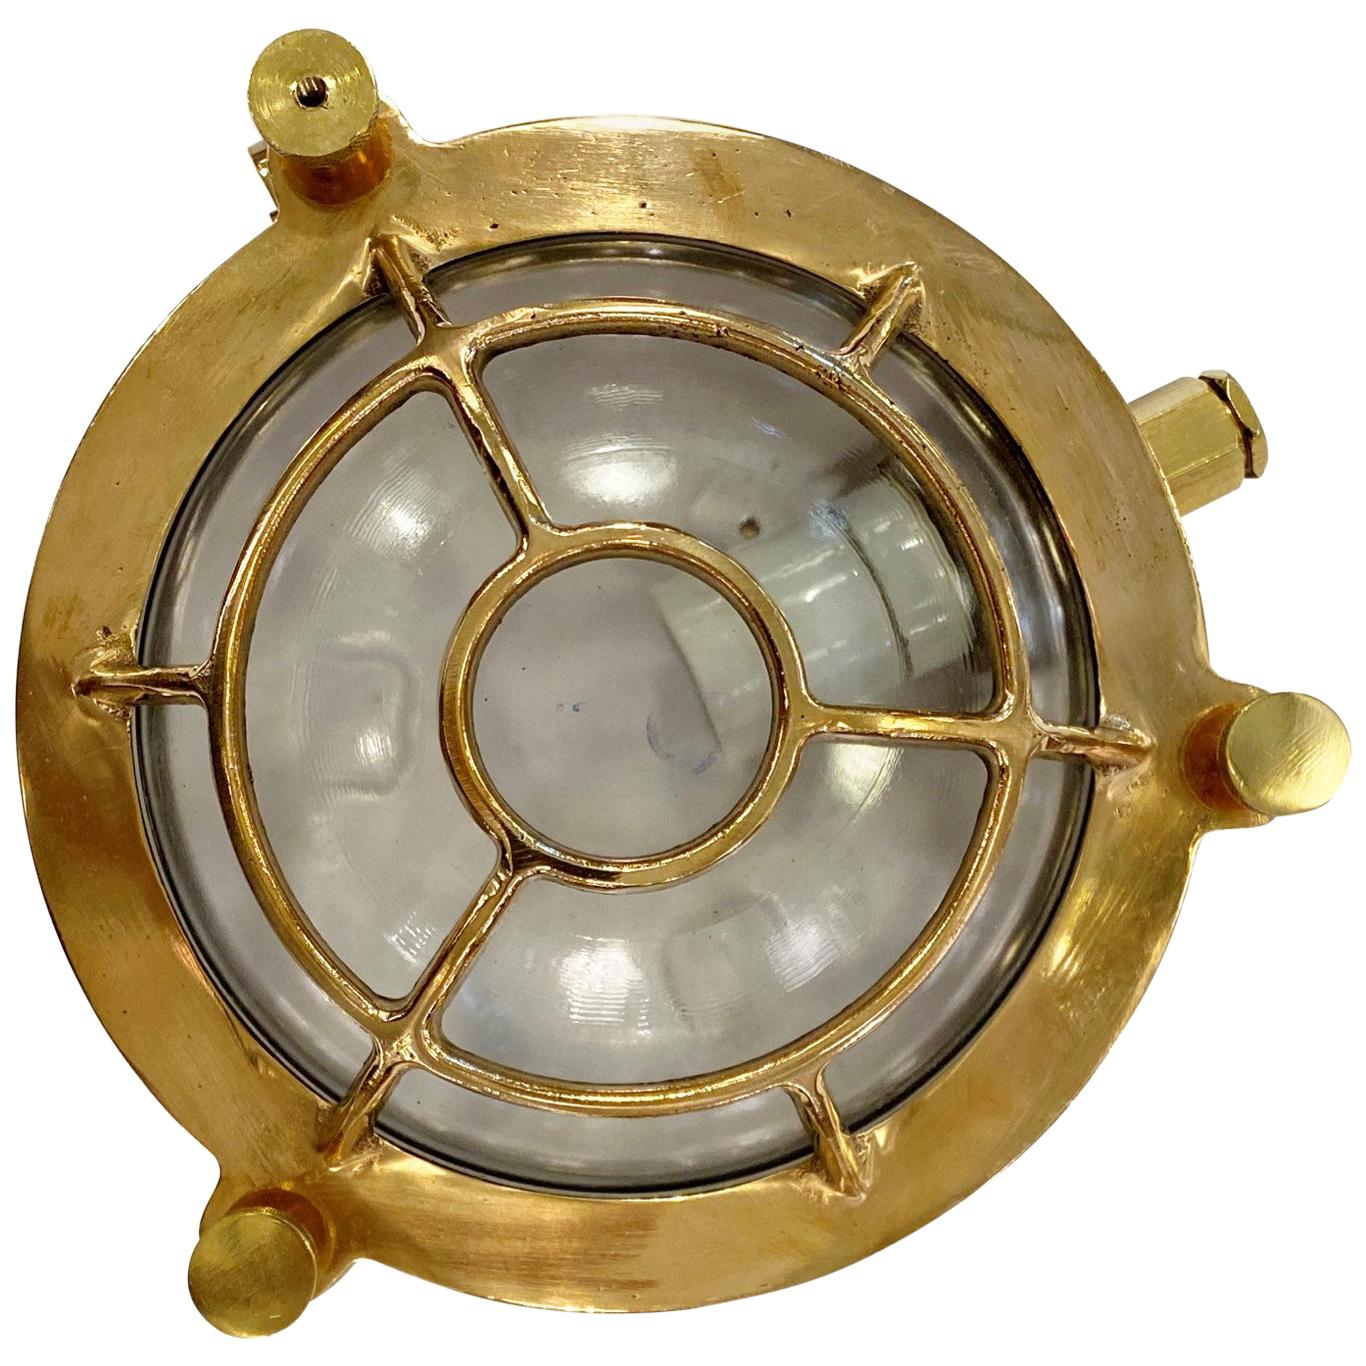 2010s Round Nautical Ship Light Sconce Cast Brass with Cage Bulkhead